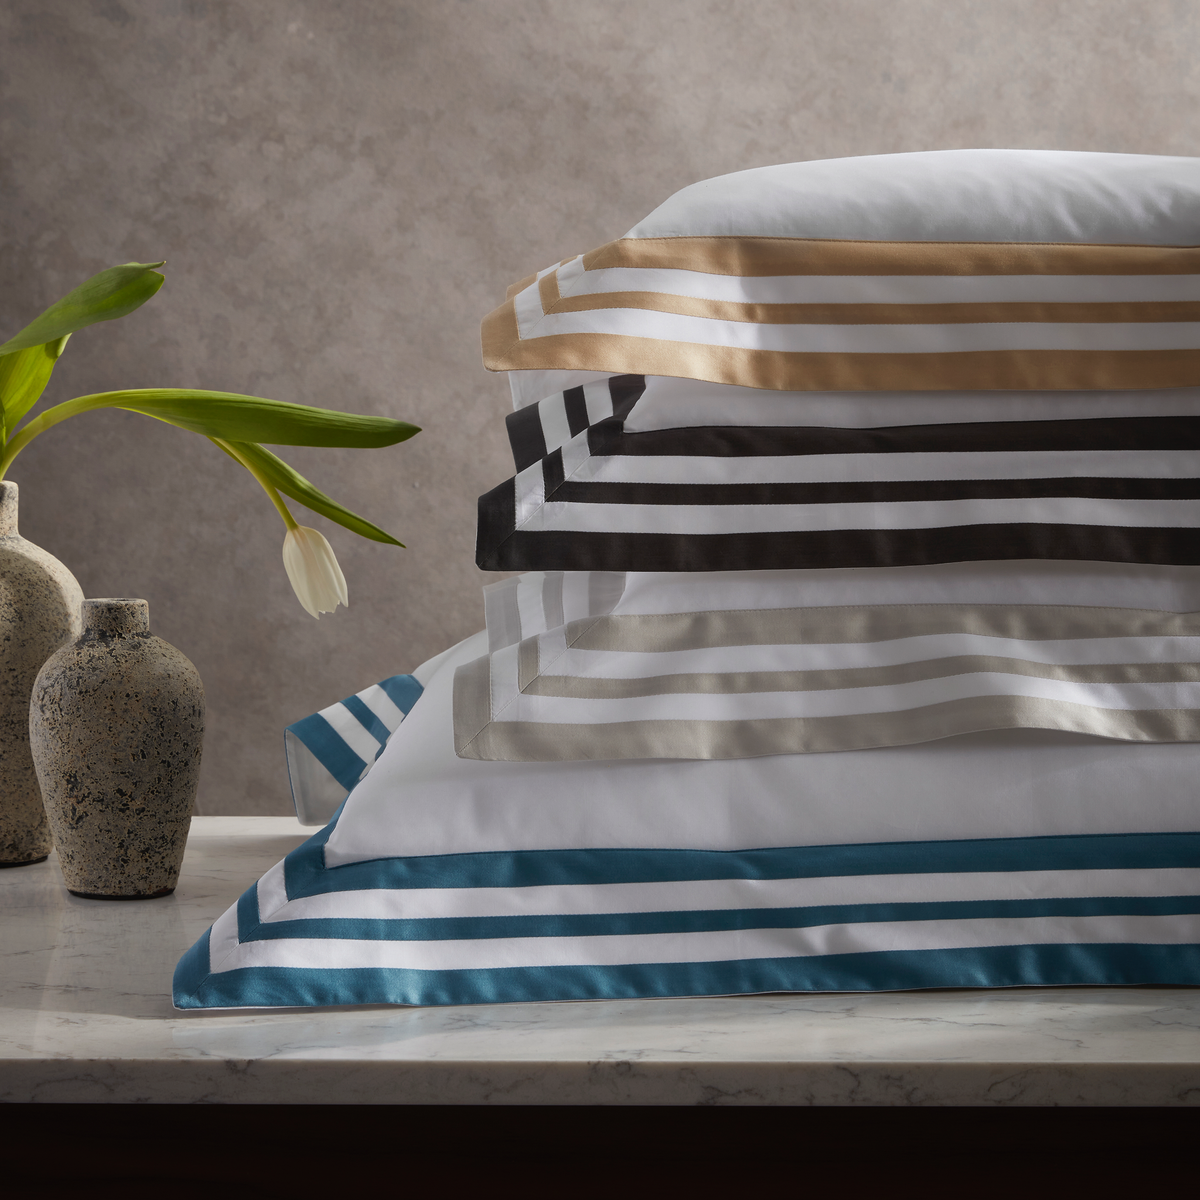 Stack of Sham of Matouk Allegro Bedding in all available colors